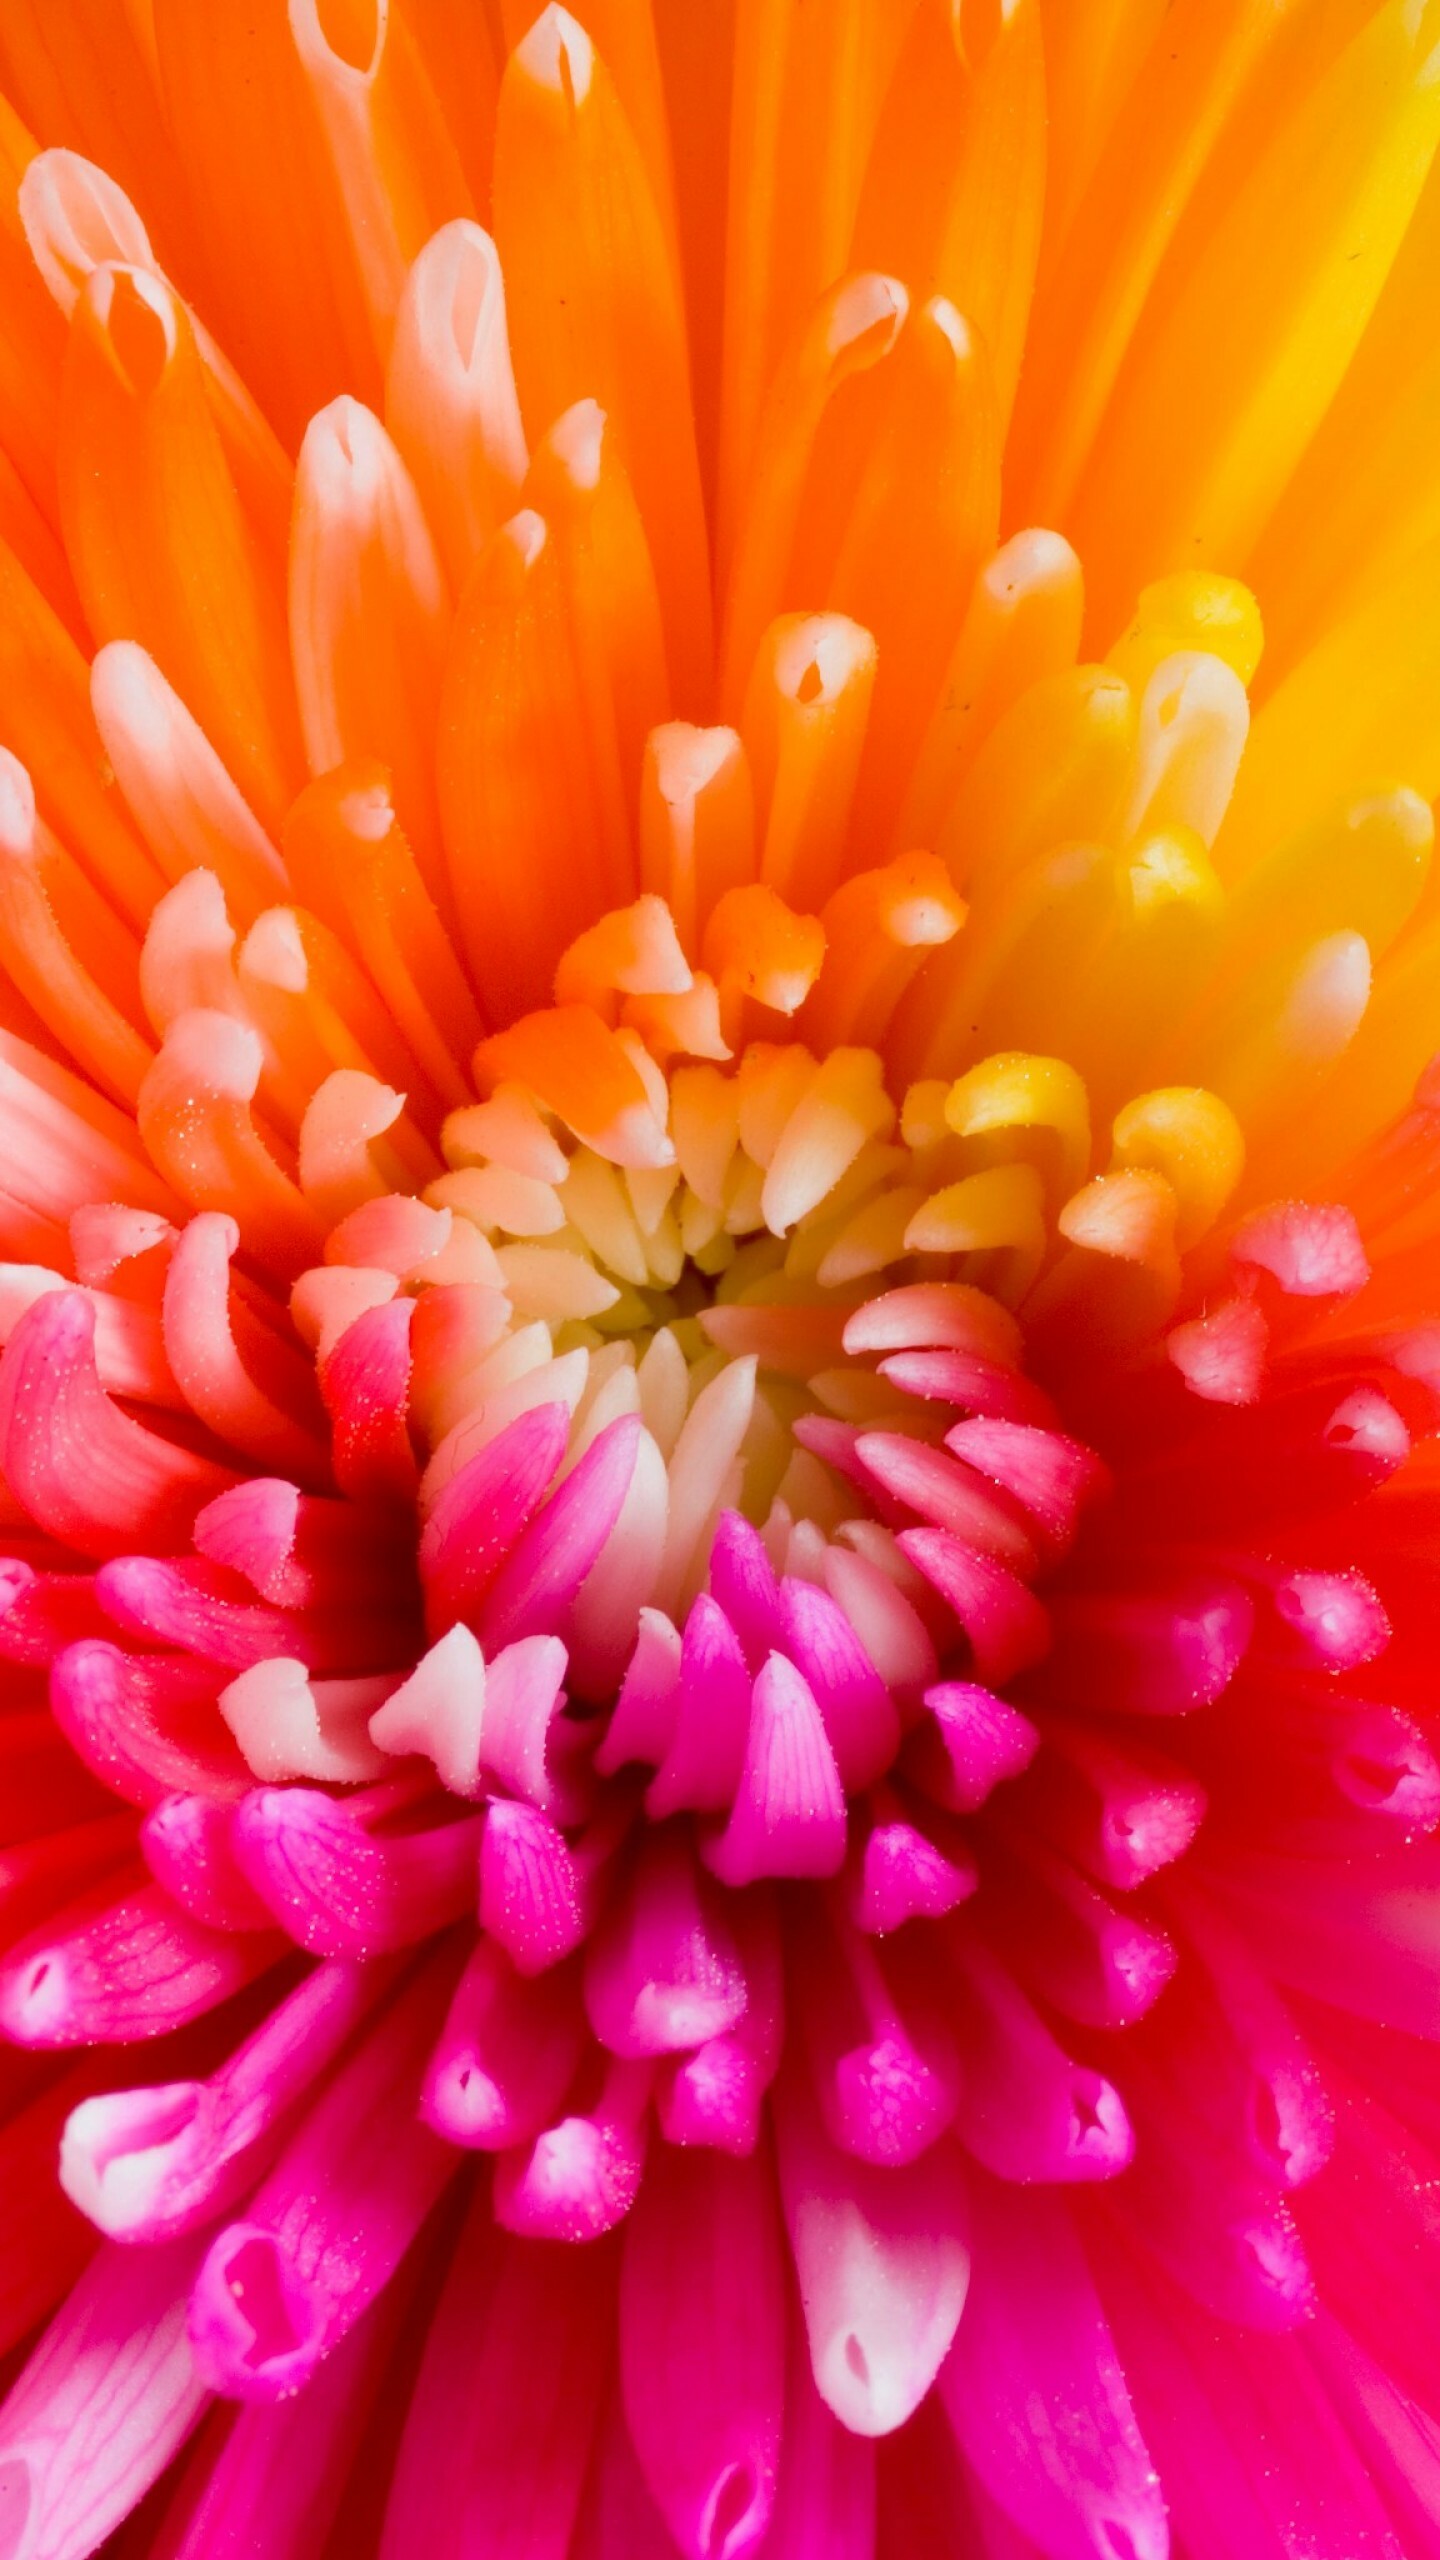 Chrysanthemum: The exhibition varieties can be used to create many amazing plant forms, such as large disbudded blooms, spray forms, and many artistically trained forms, such as thousand-bloom, standard, fans, hanging baskets, topiary, bonsai, and cascades. 1440x2560 HD Wallpaper.